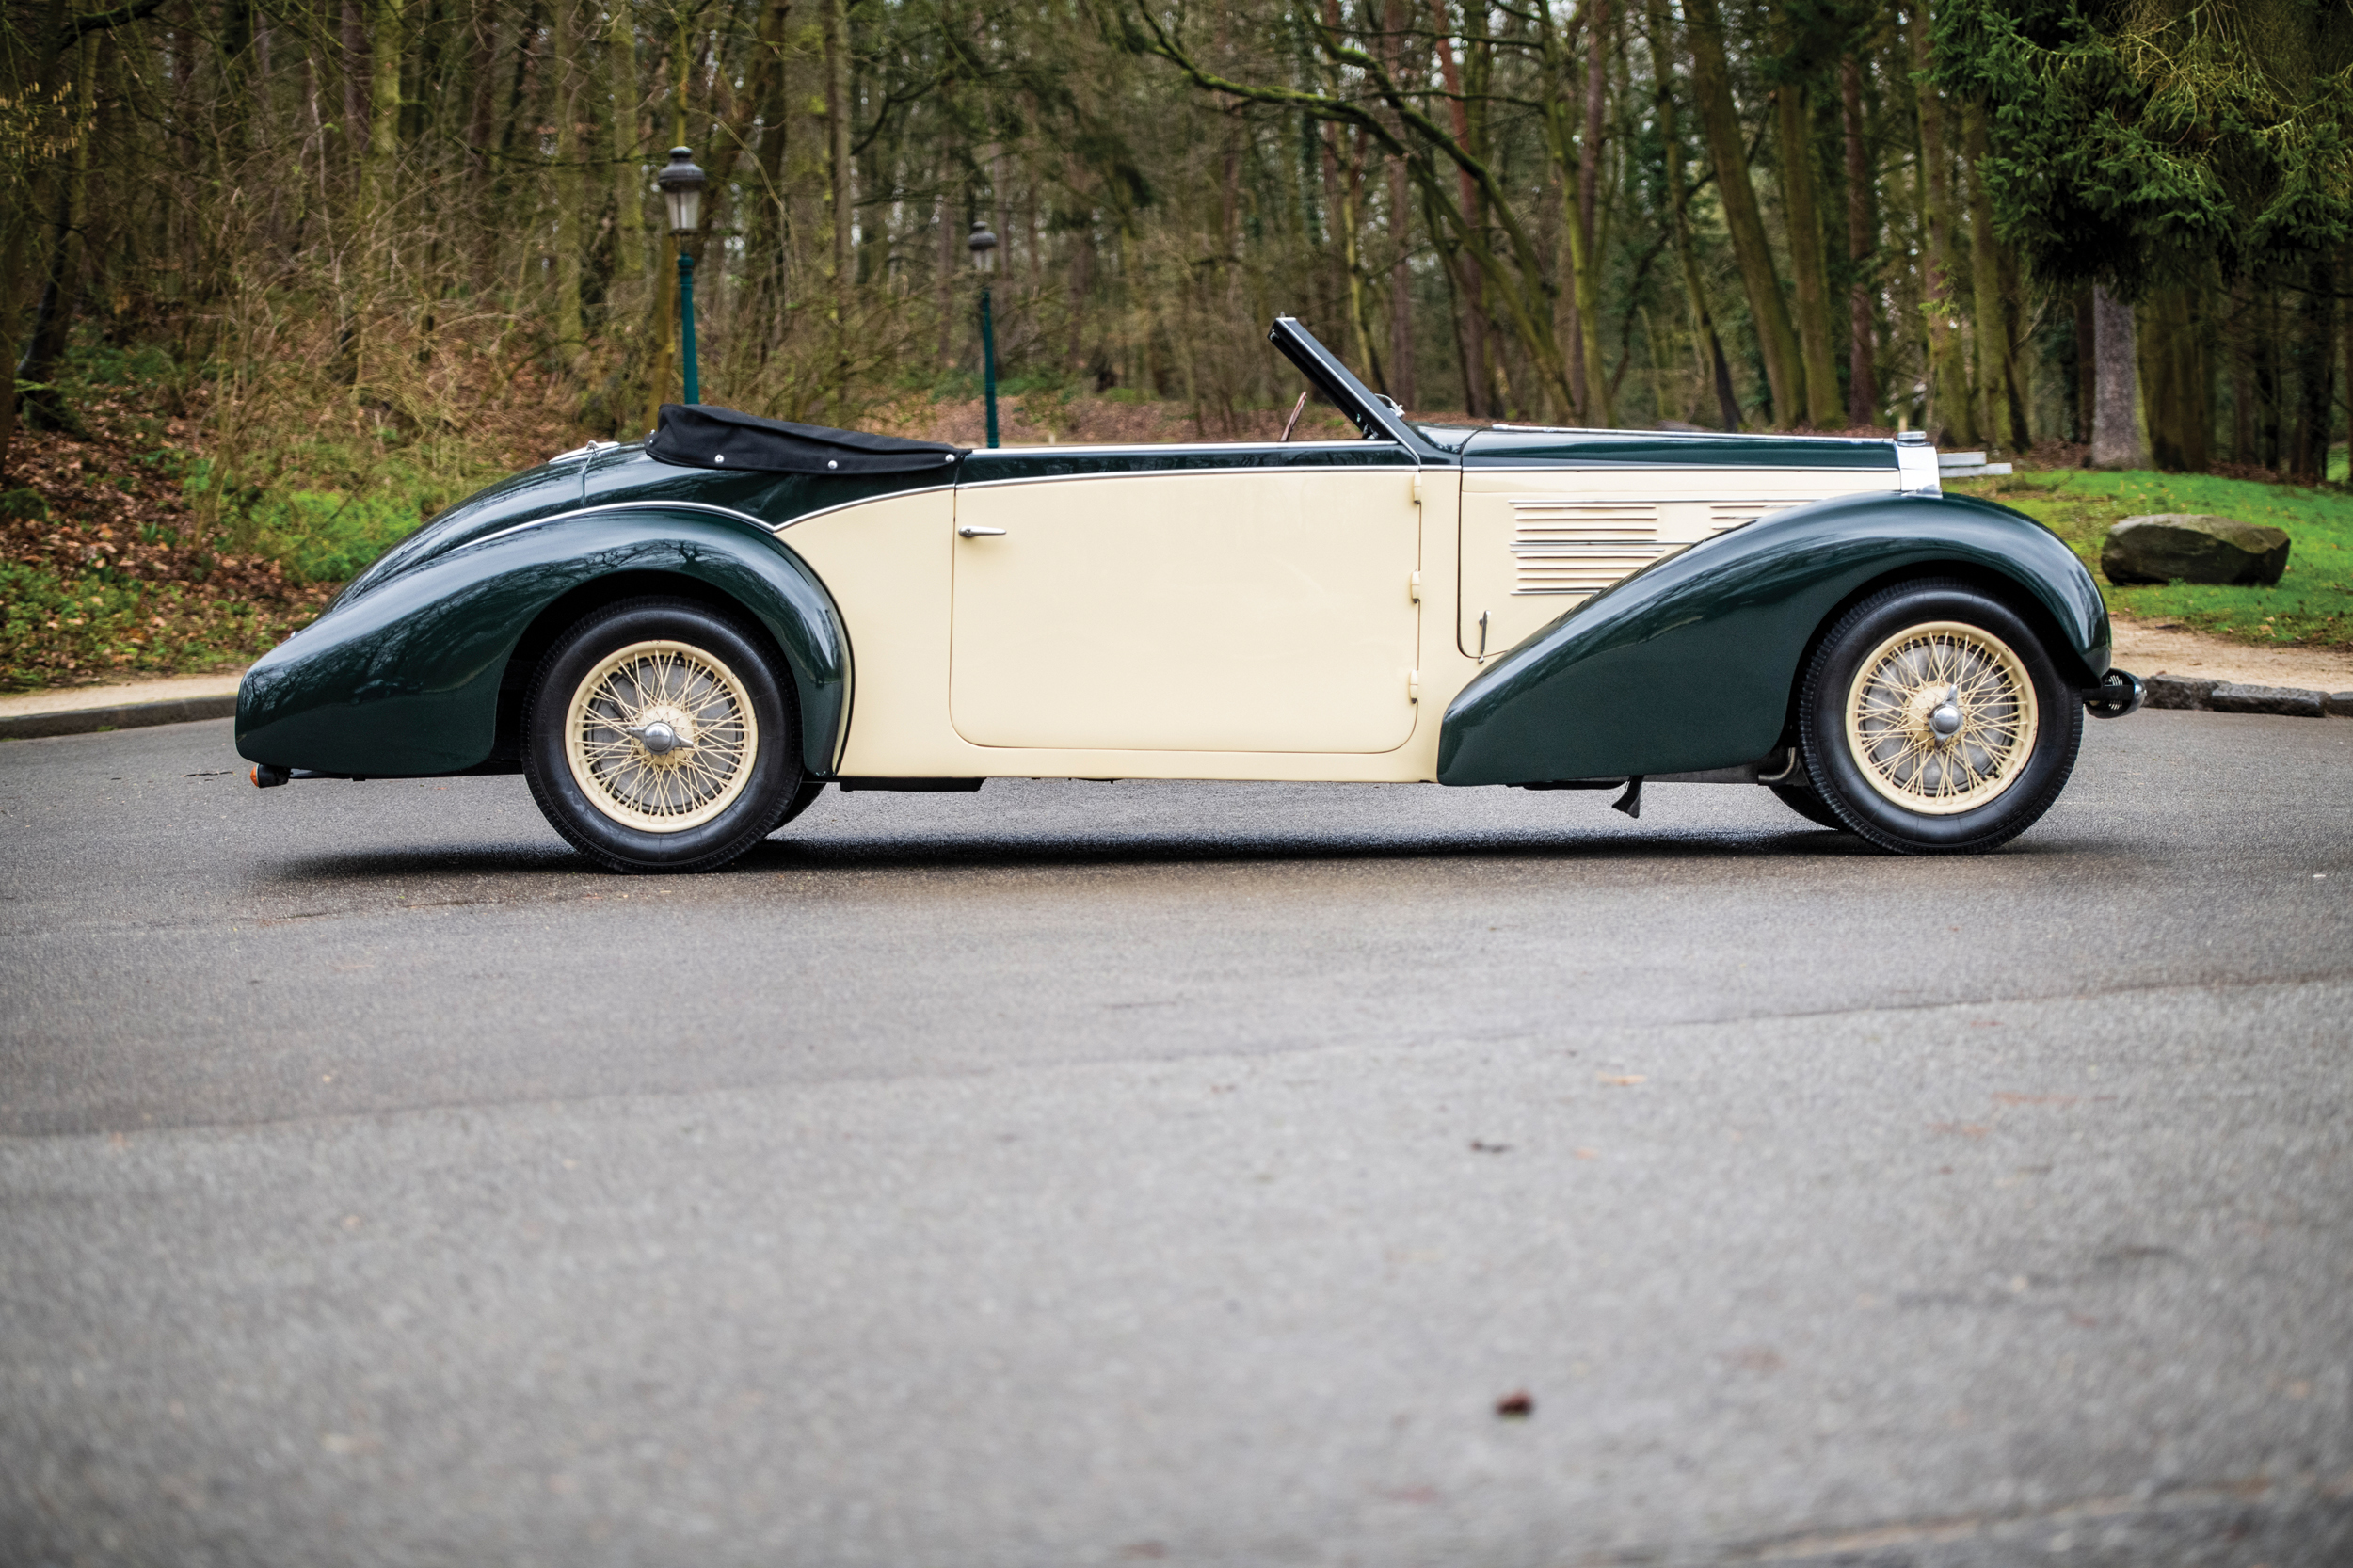 1938 Bugatti Type 57 Cabriolet Remi Dargegen © 2020 Courtesy of RM Sotheby's